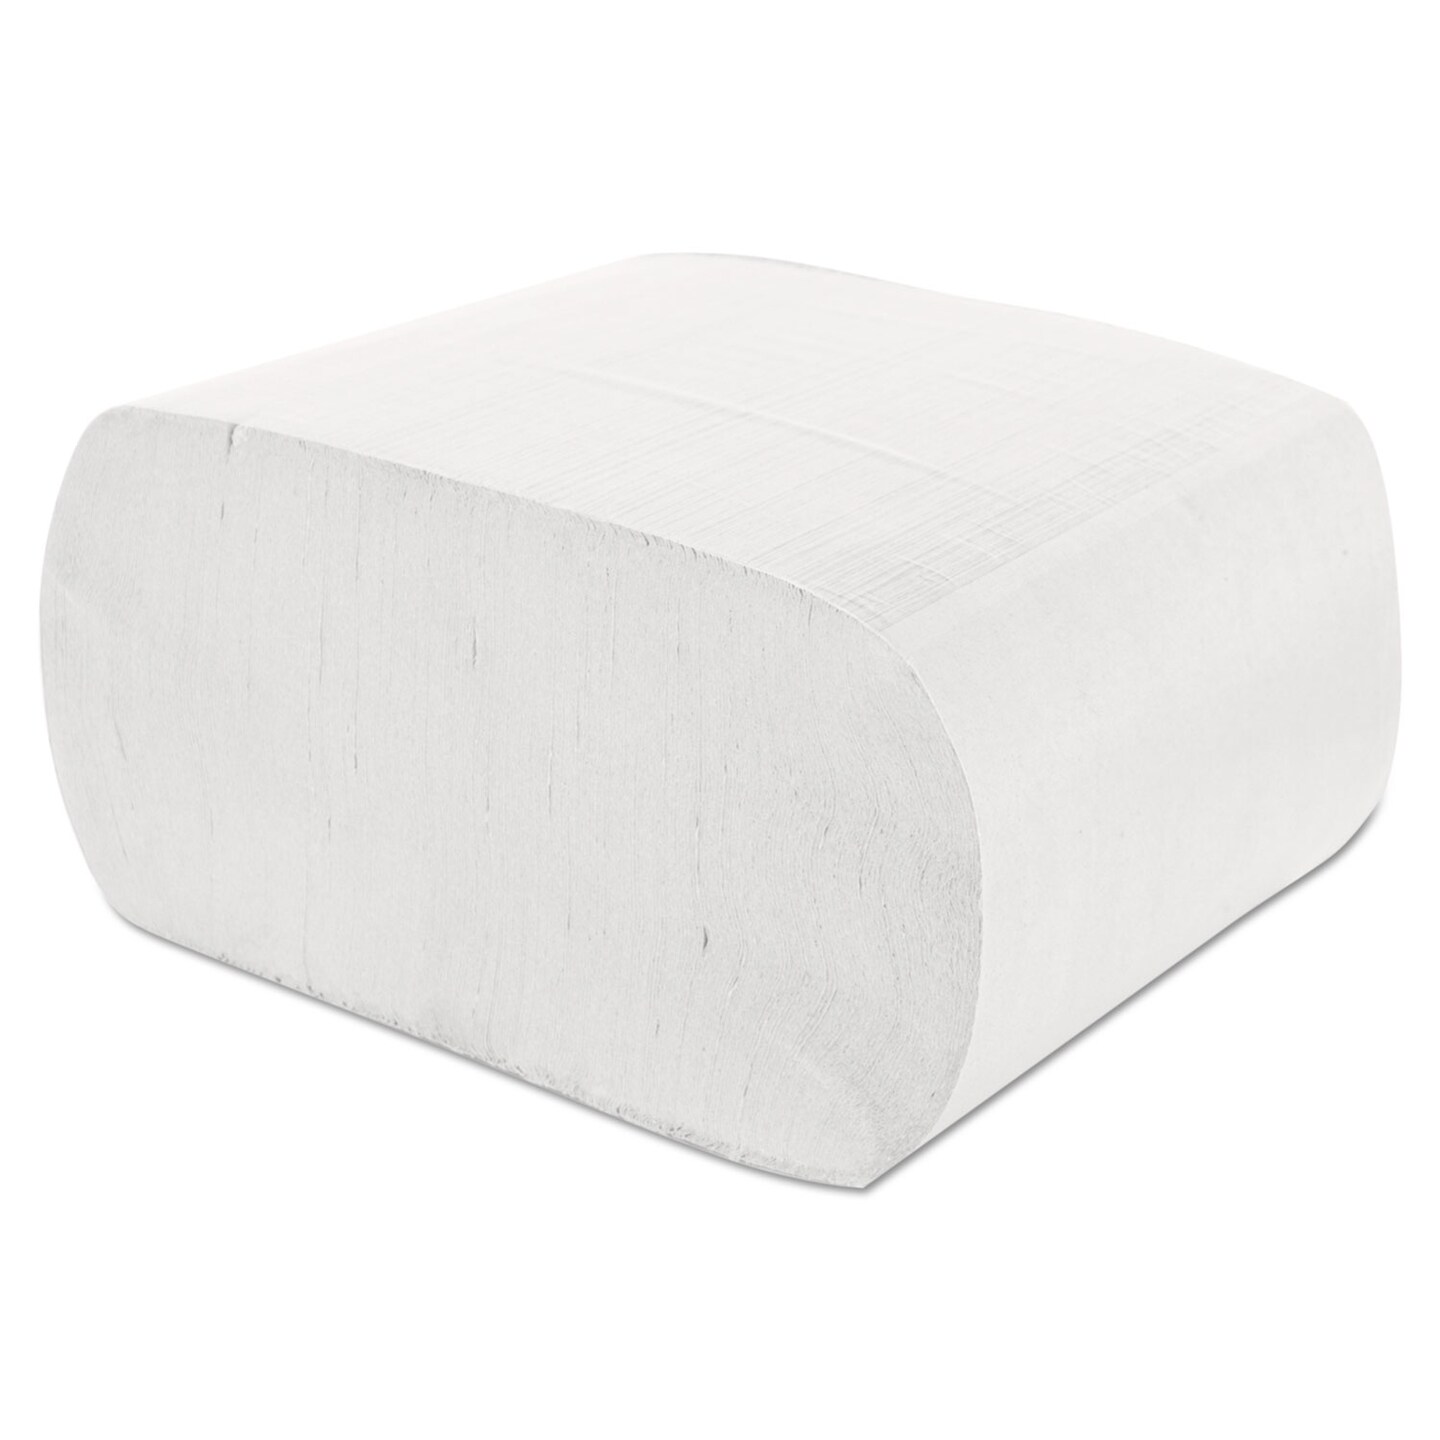 Morcon Paper Valay Interfolded Napkins, 1-Ply, White, 6.5 x 8.25, 6,000 ...